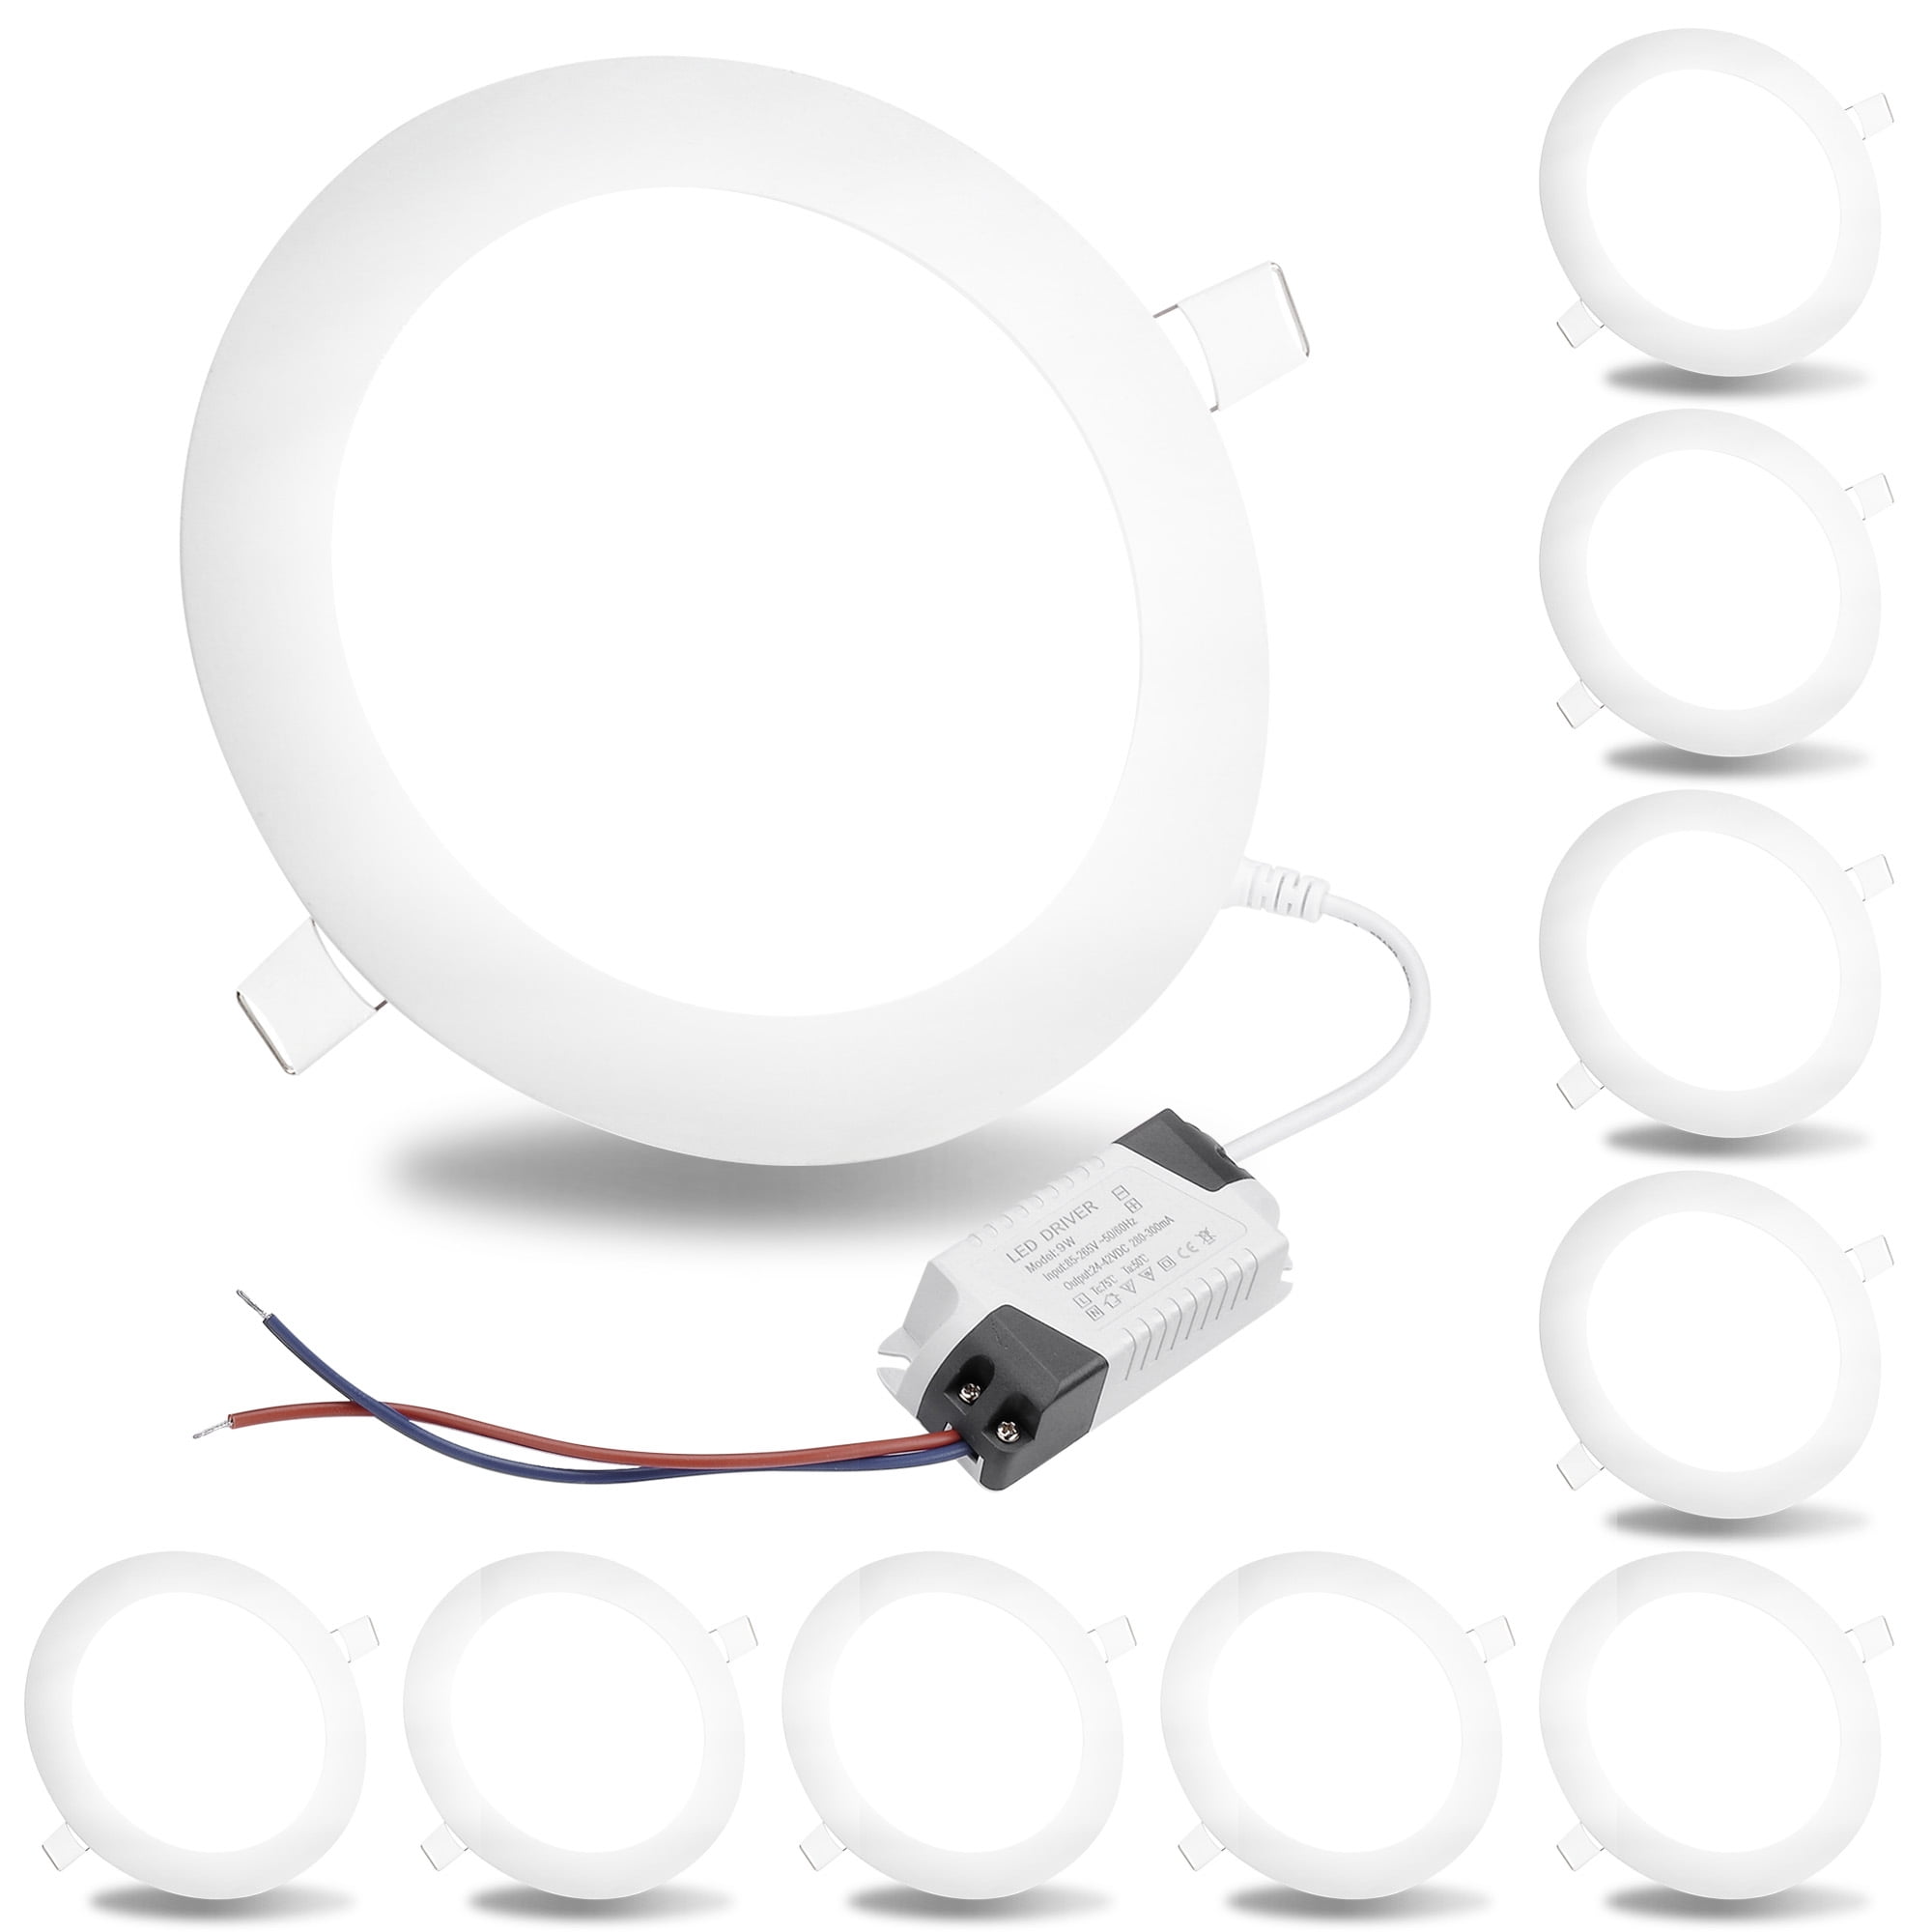 10X 18W 8" Warm White LED Recessed Ceiling Panel Down Light Fixture+Junction Box 